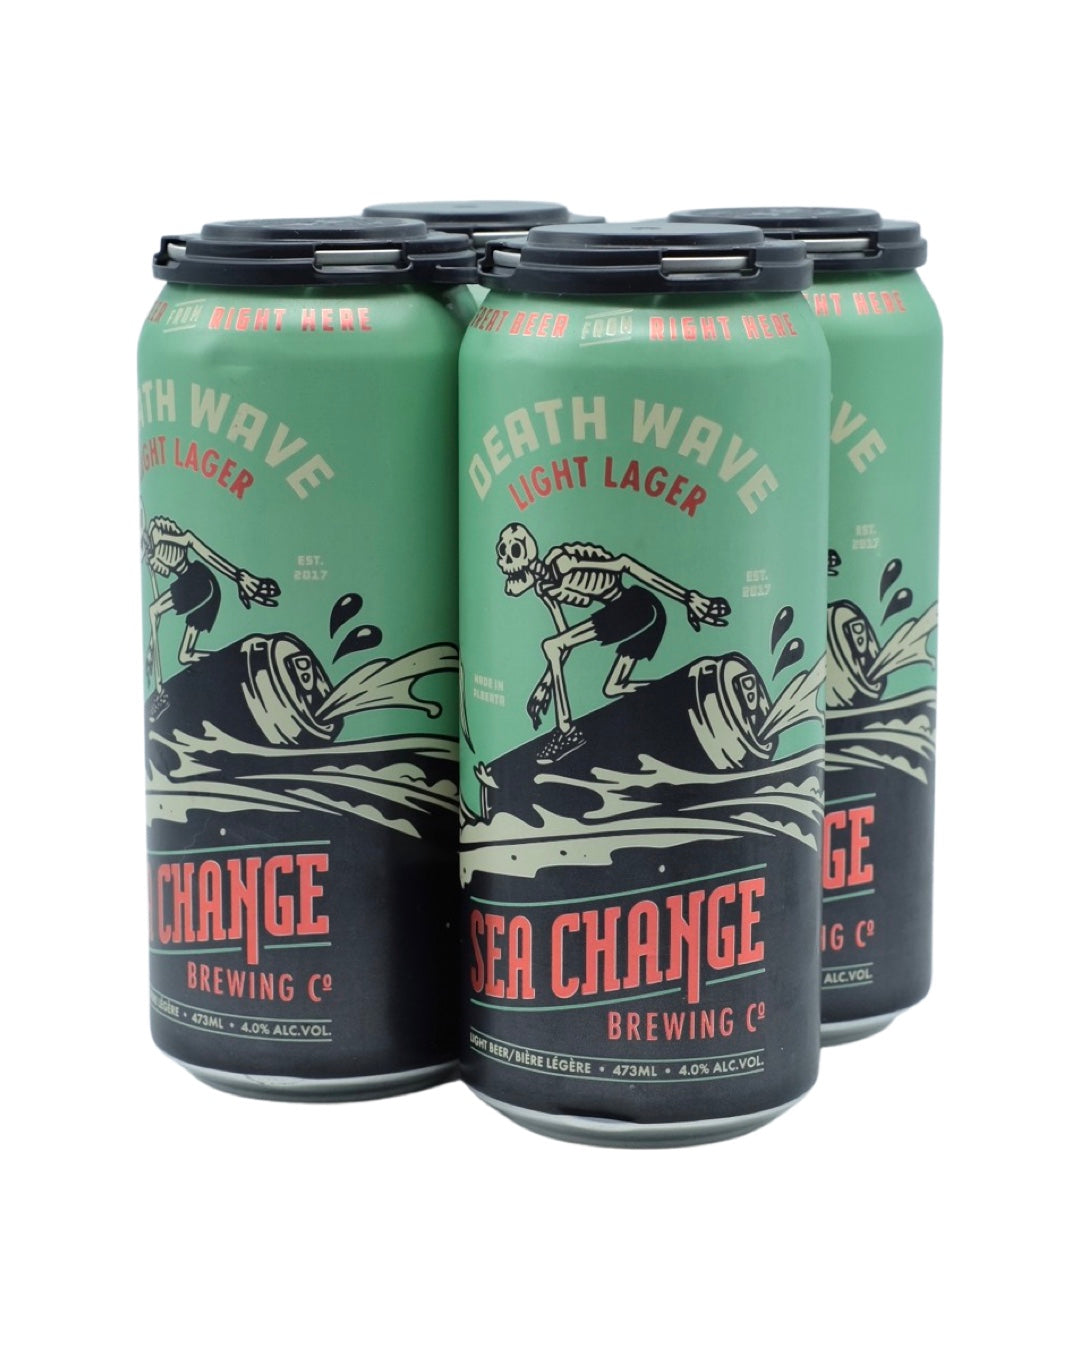 Sea Change Brewing Death Wave Mexican Lager